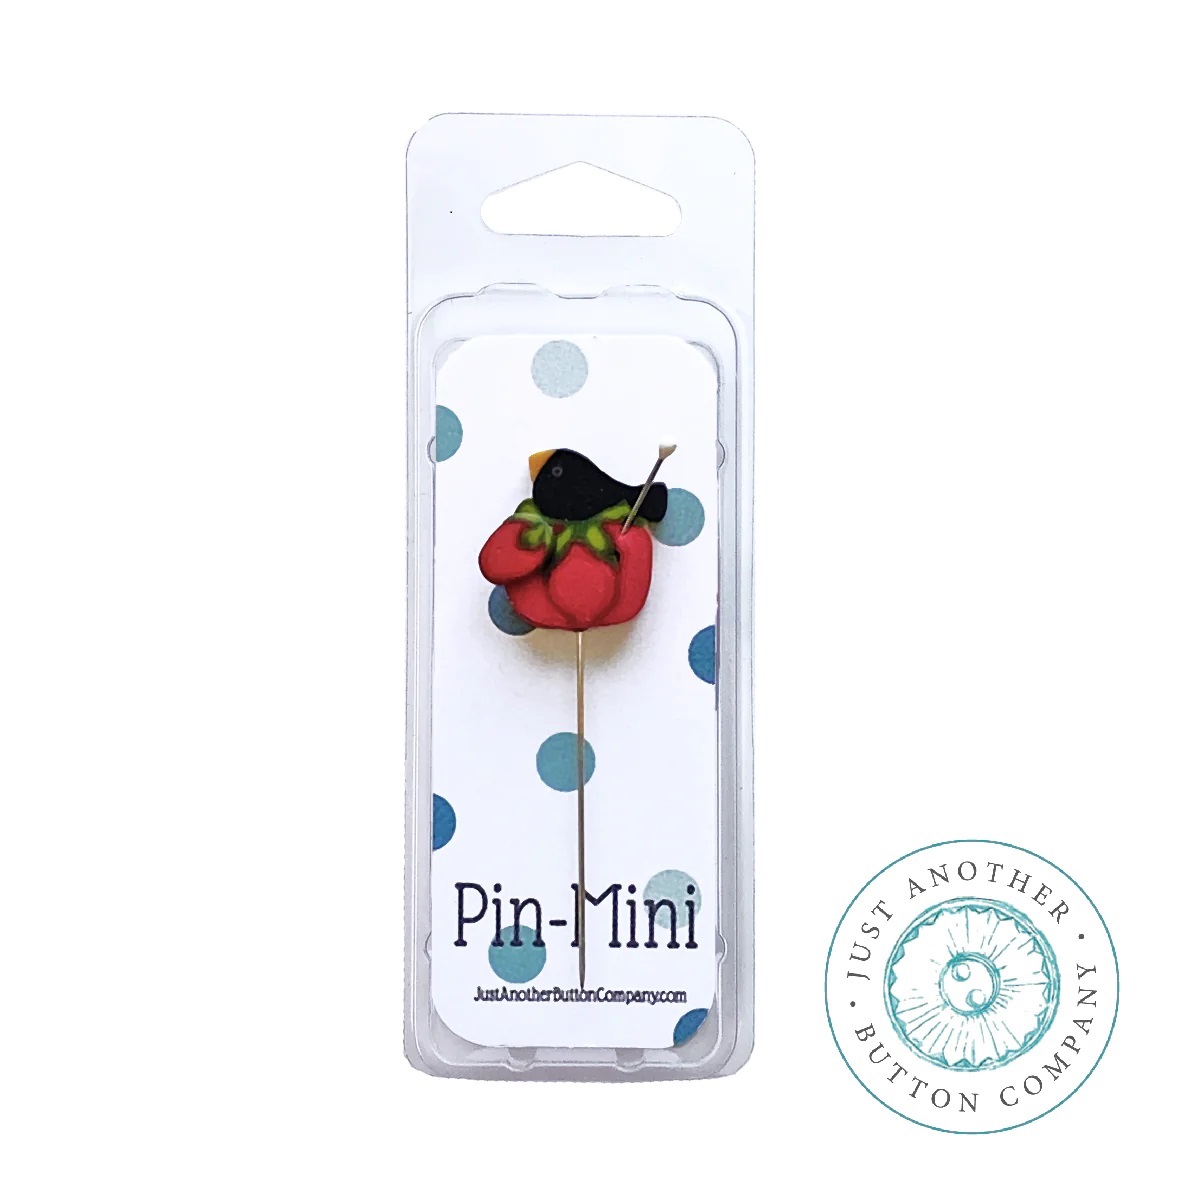 jpm550 Sewing Bird Solo : Pin-Mini by Just Another Button Company